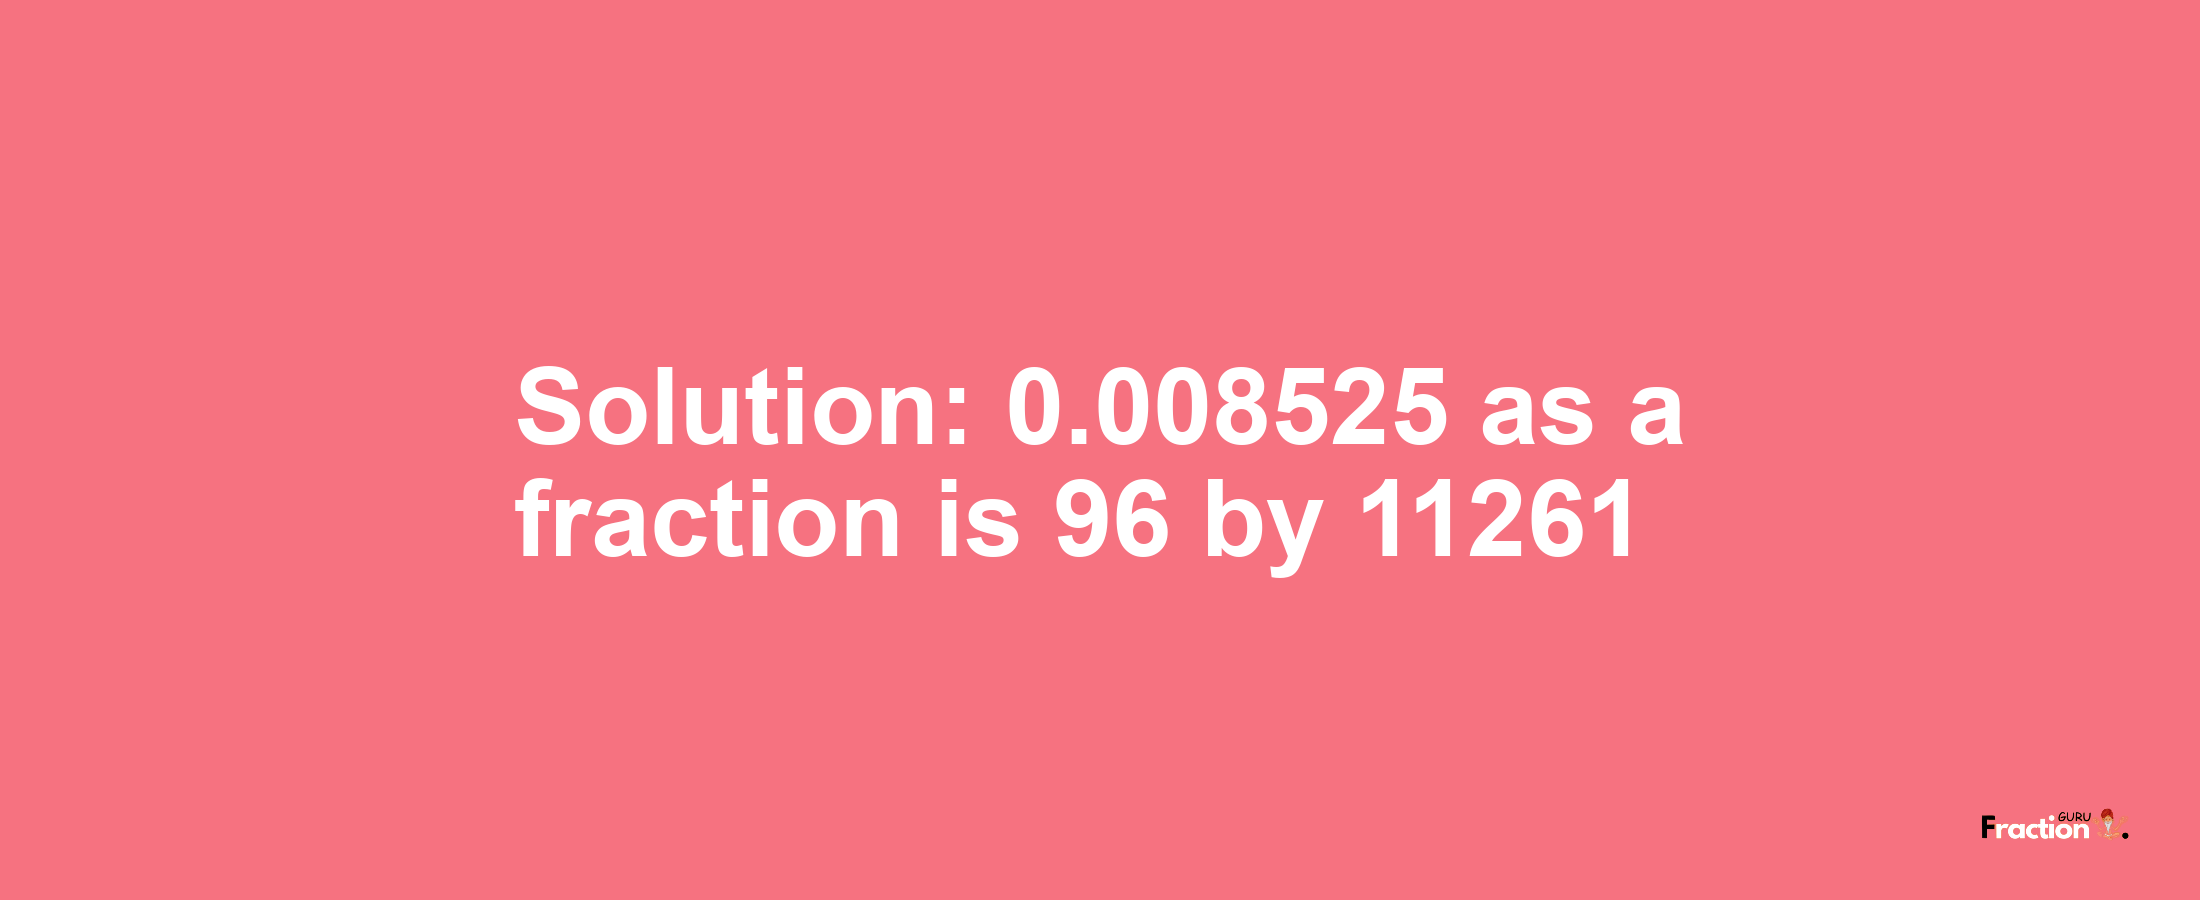 Solution:0.008525 as a fraction is 96/11261